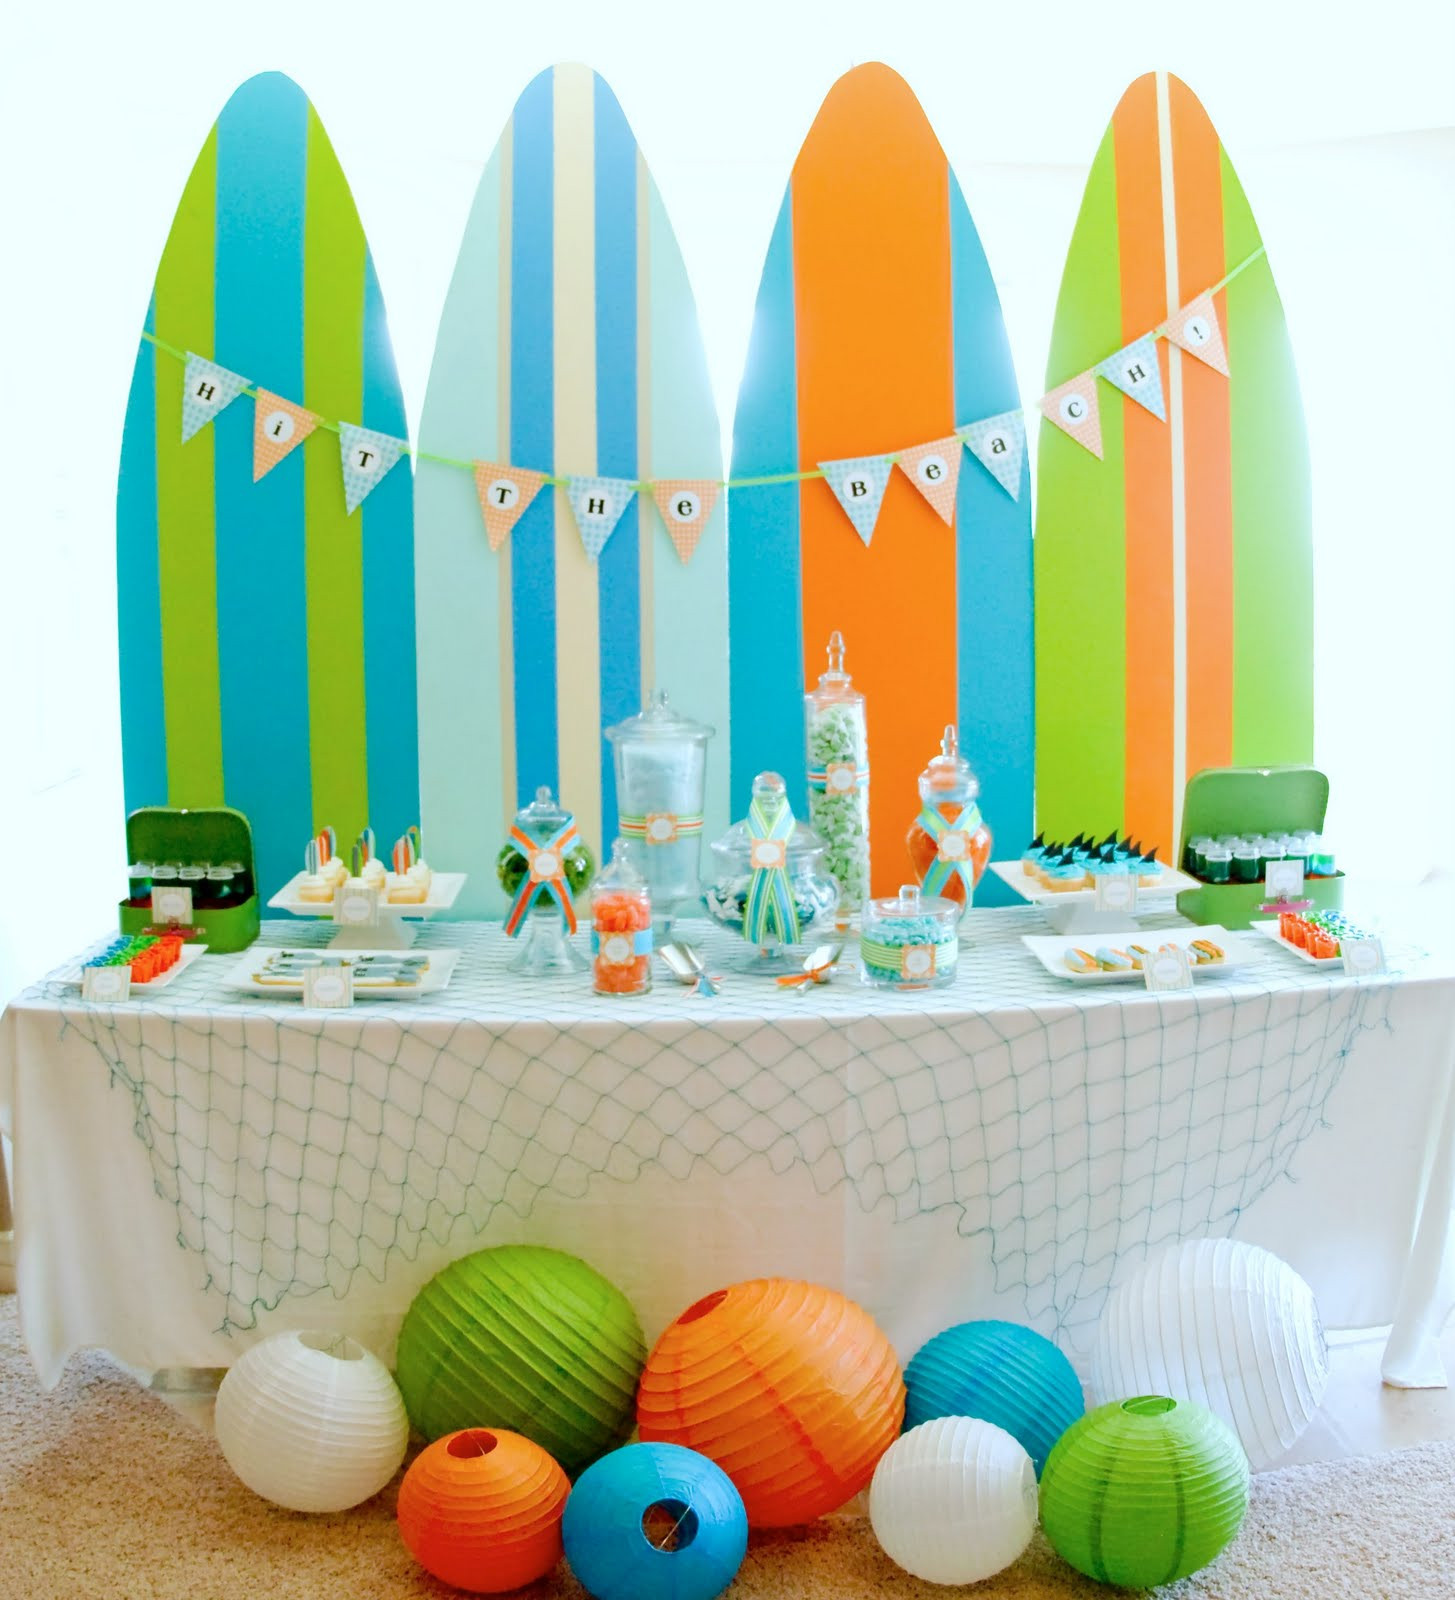 Pool Party Ideas For Boys
 Kara s Party Ideas Surf s Up Summer Pool Party